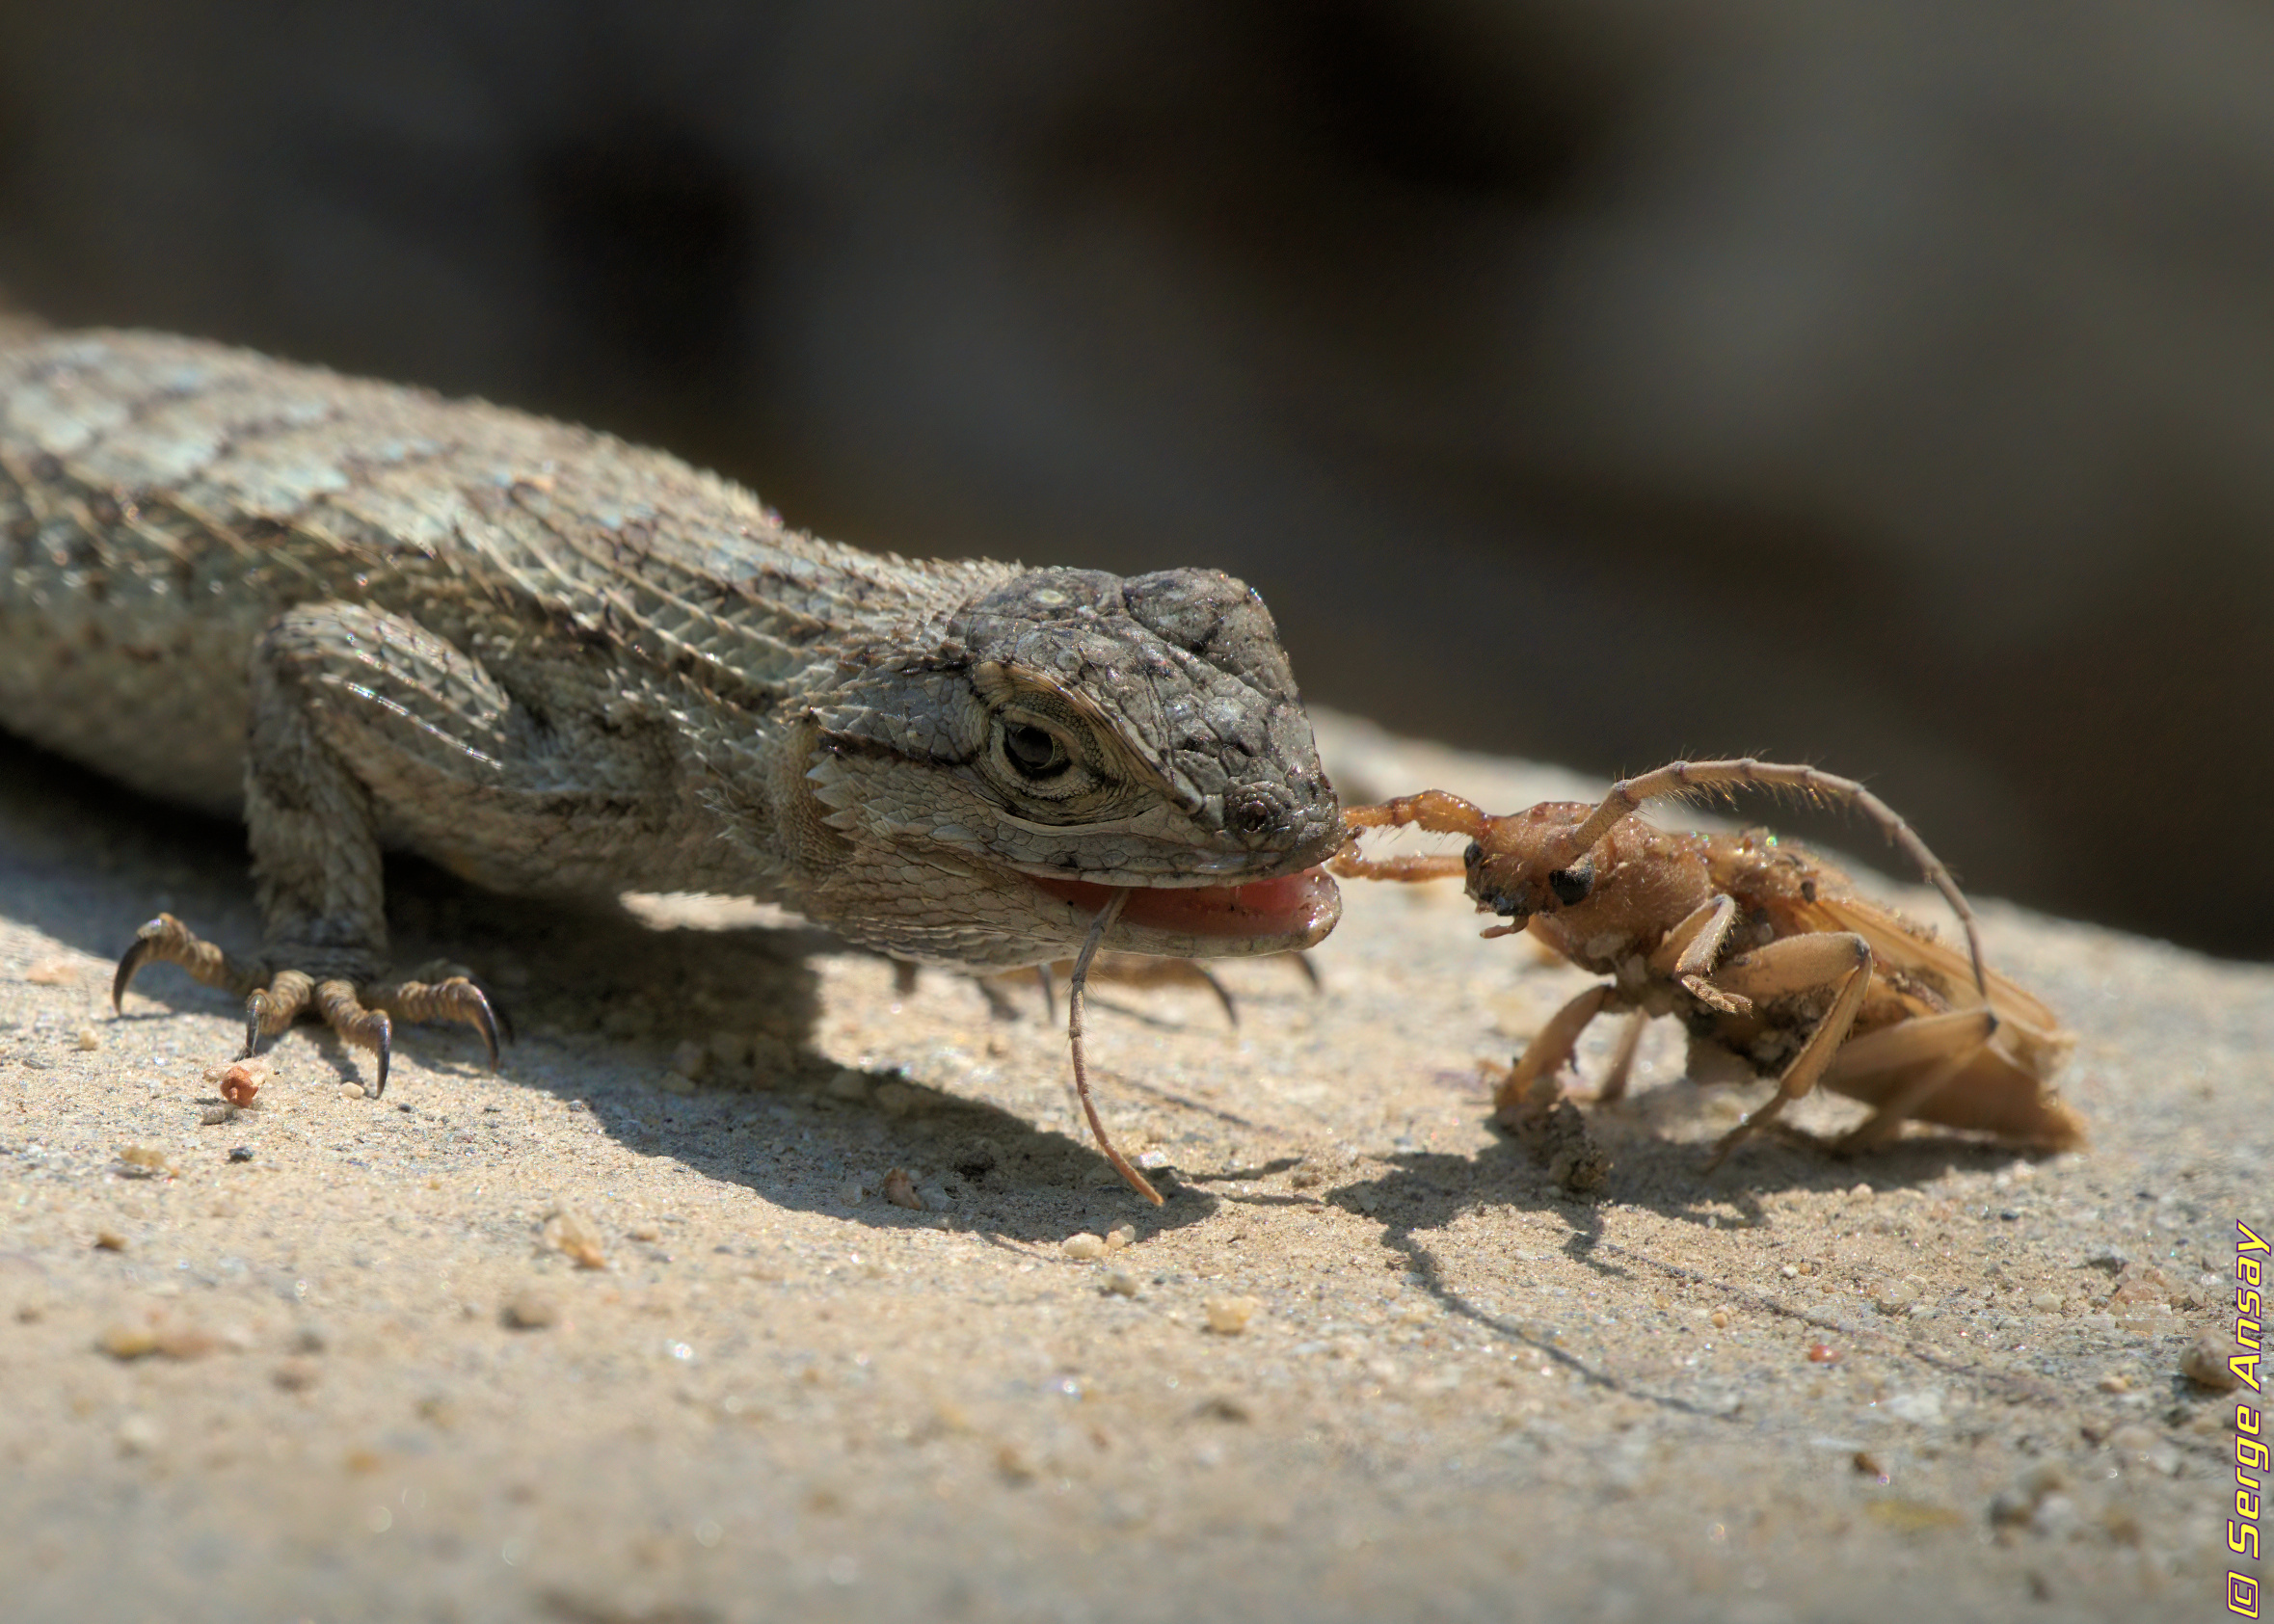 lizard eating insect